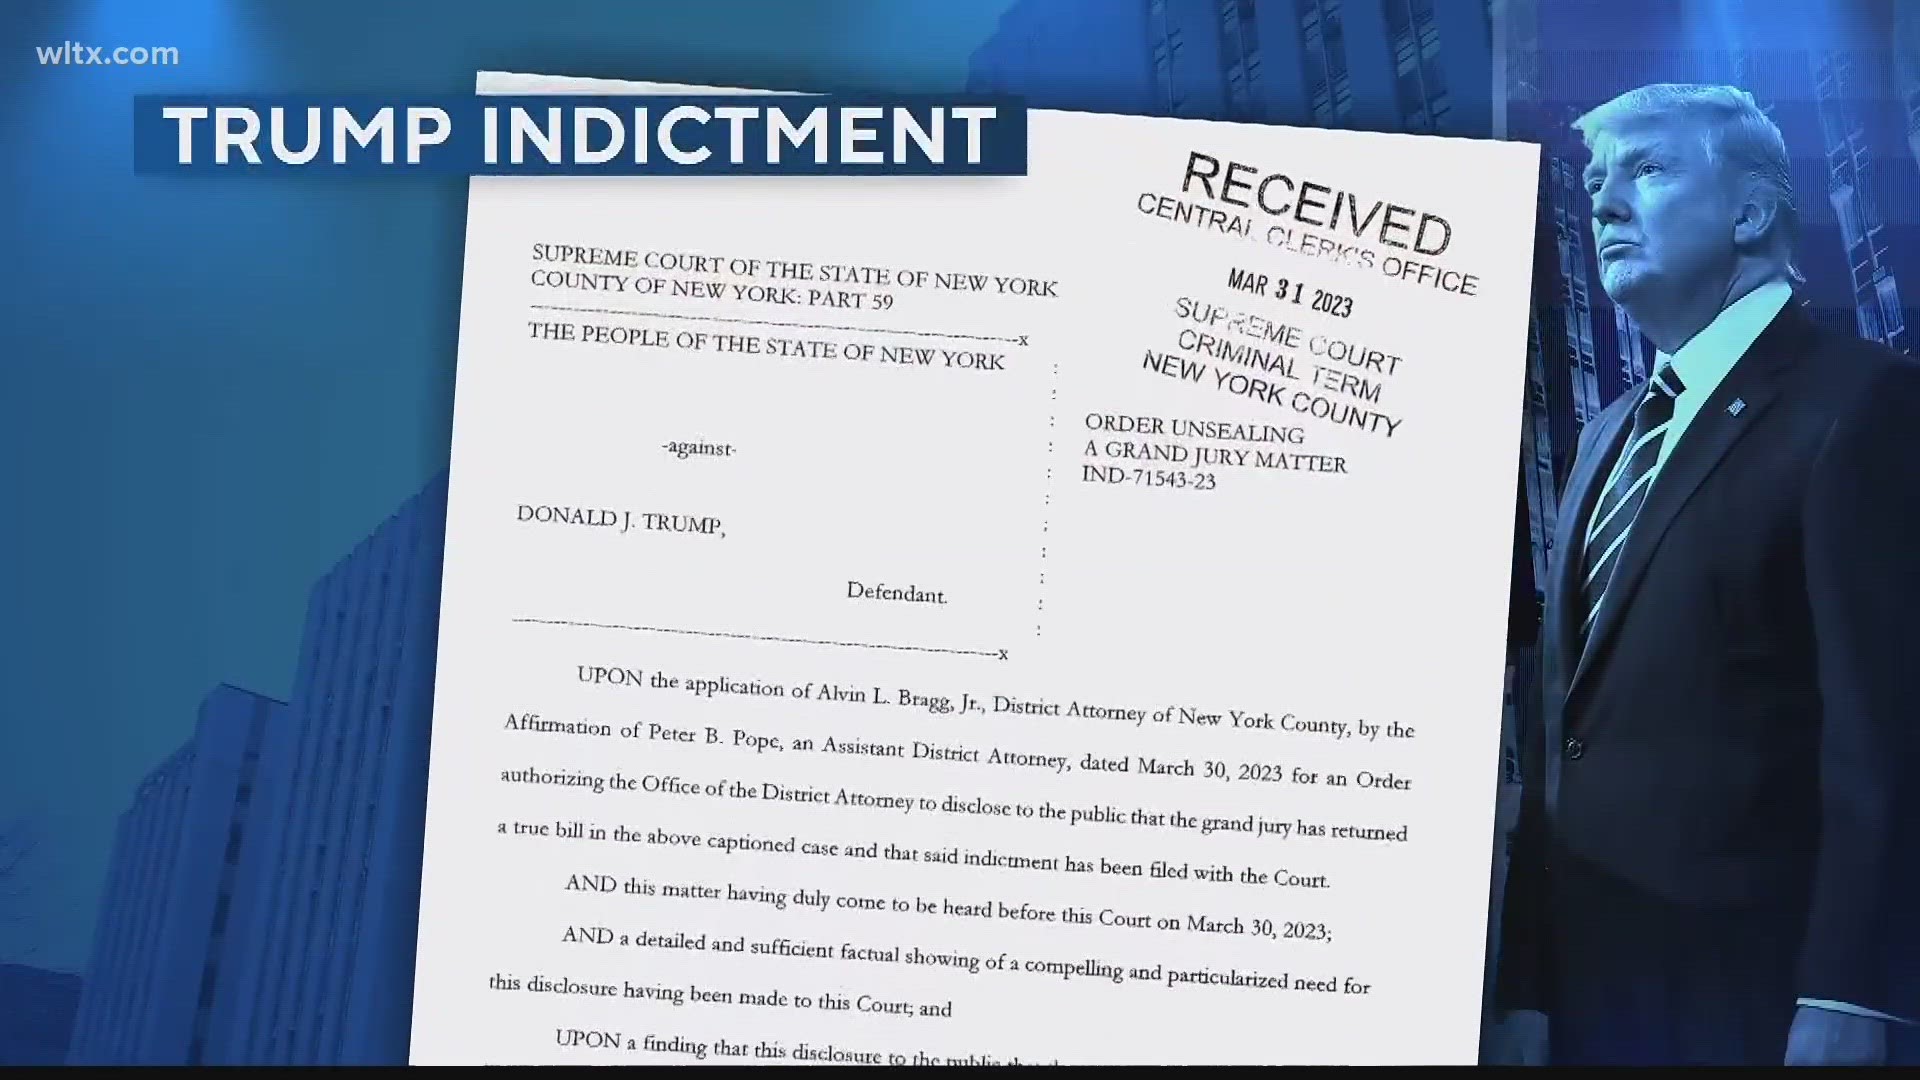 Former President Donald Trump is facing multiple charges of falsifying business records, including at least one felony offense, in the indictment handed down.